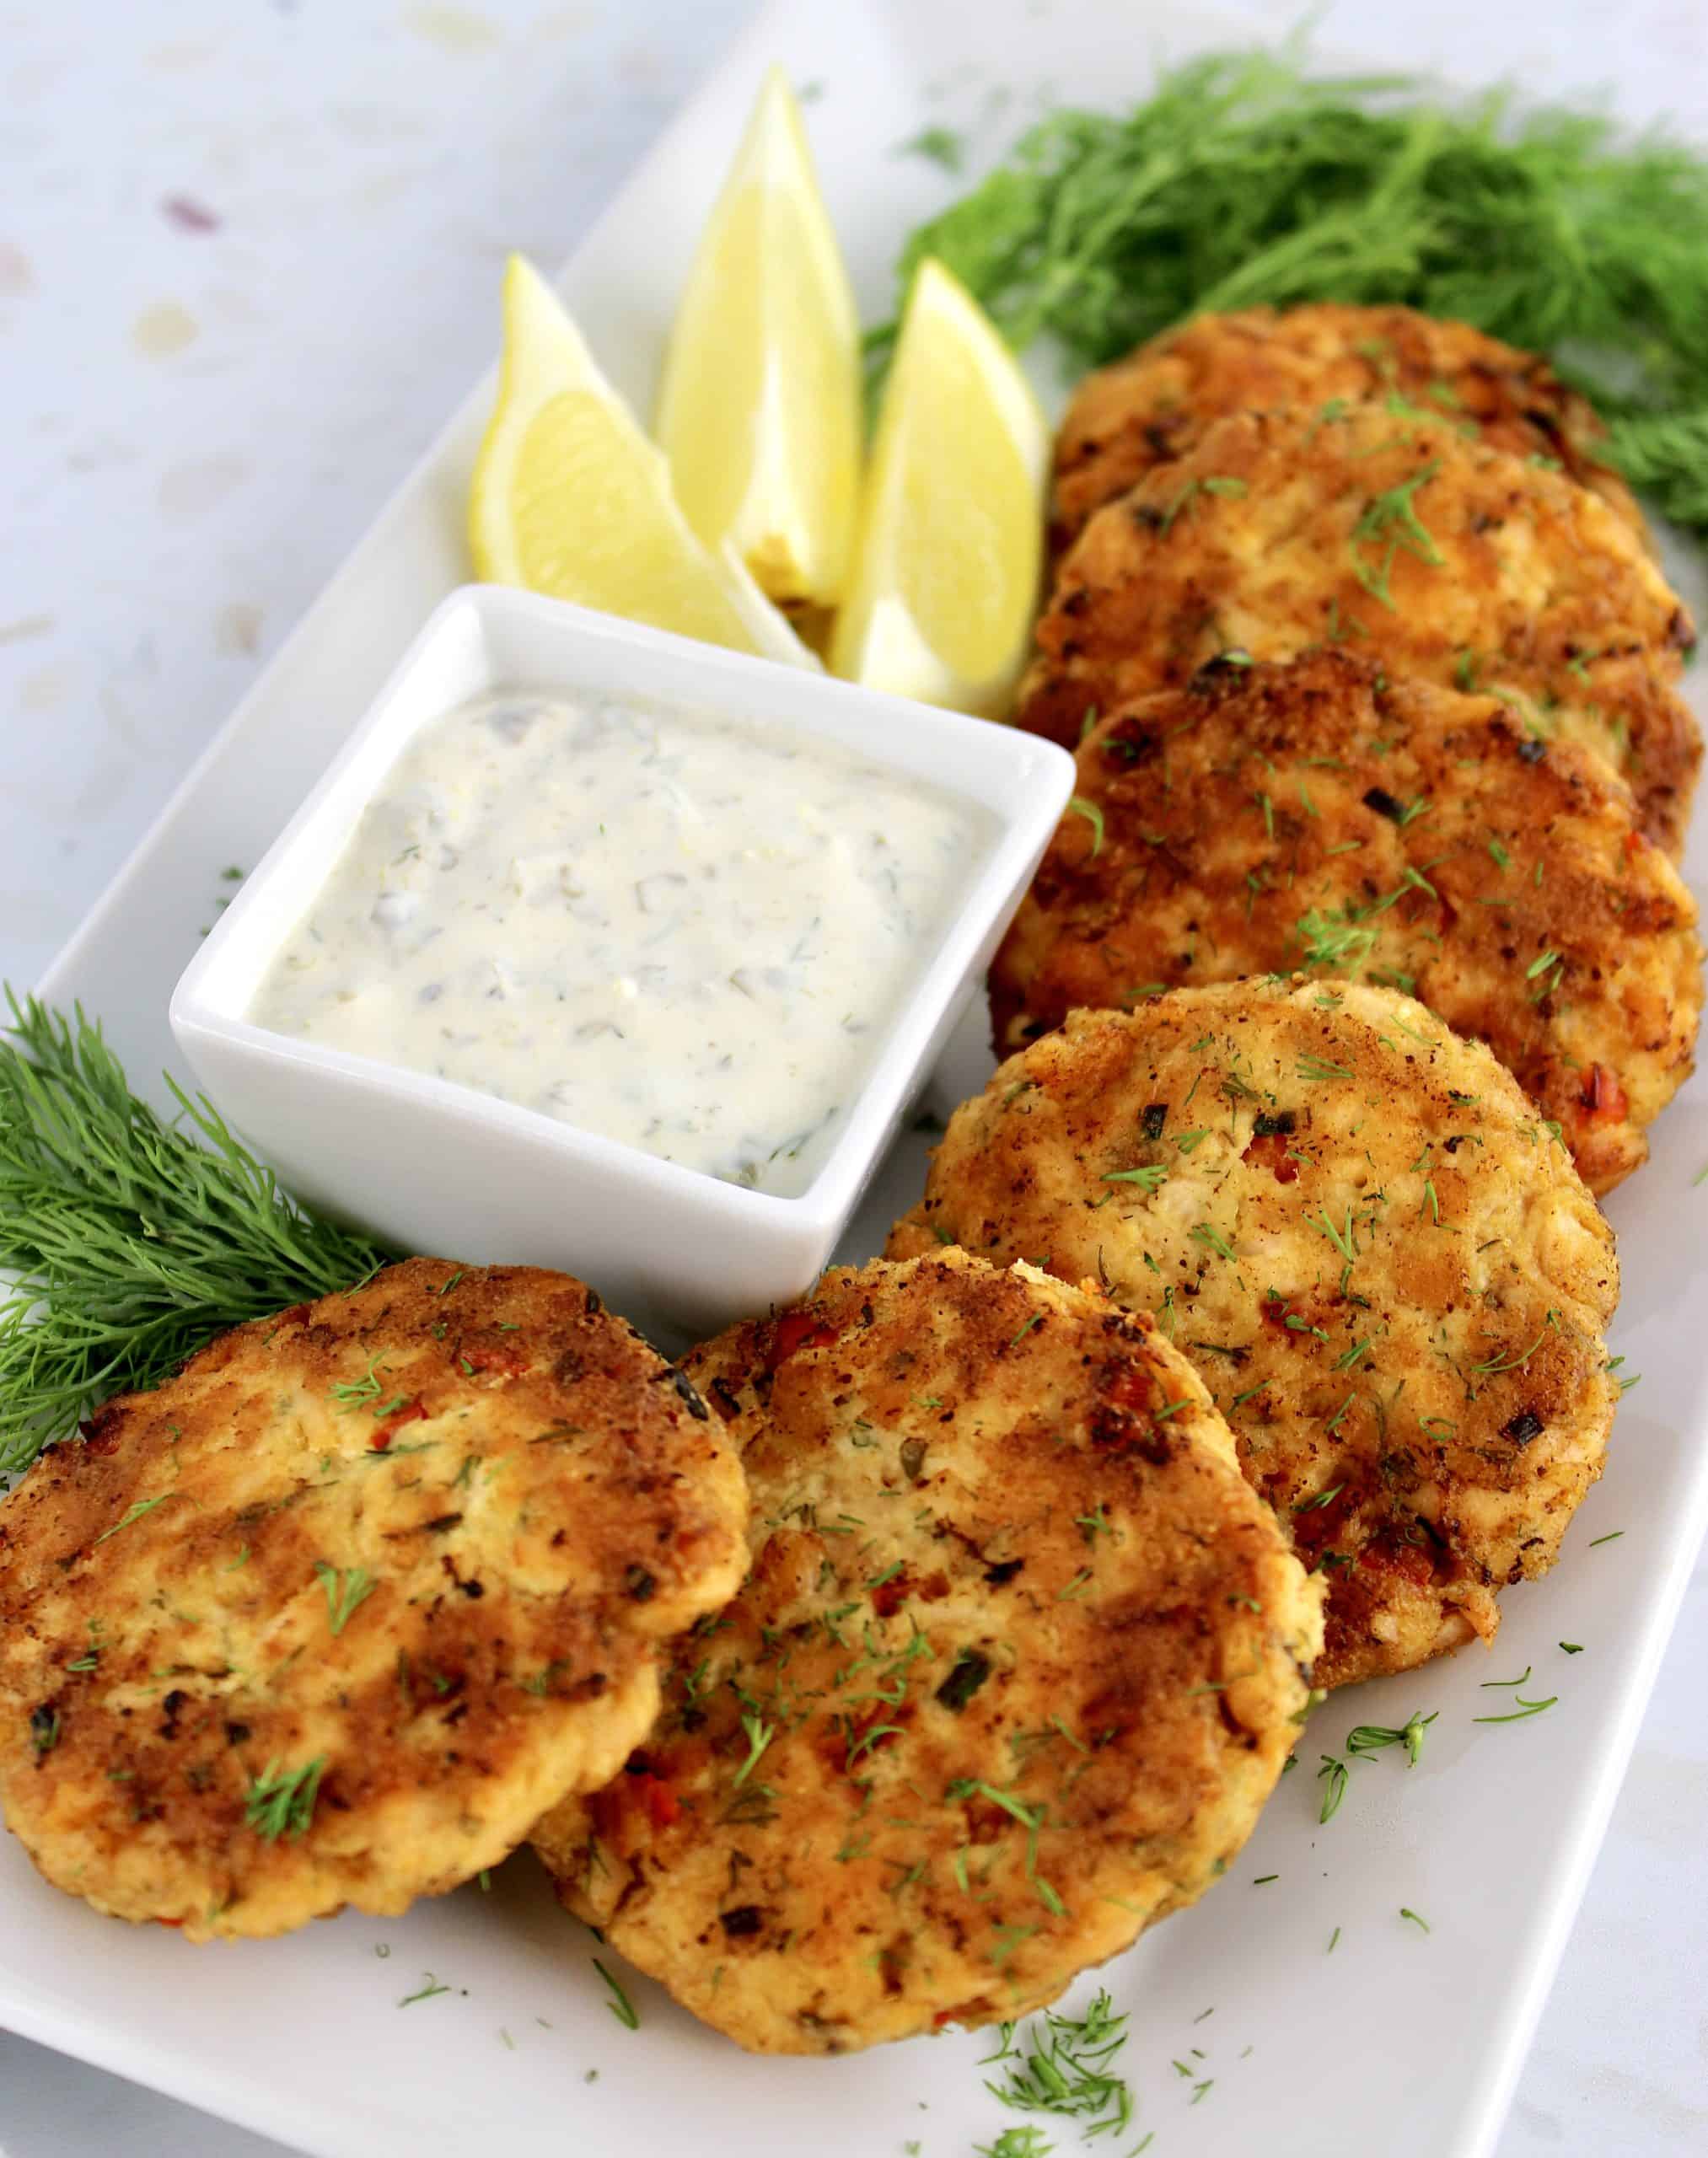 salmon patties on white plate with square dish of dill sauce lemon wedges and fresh dill on the side